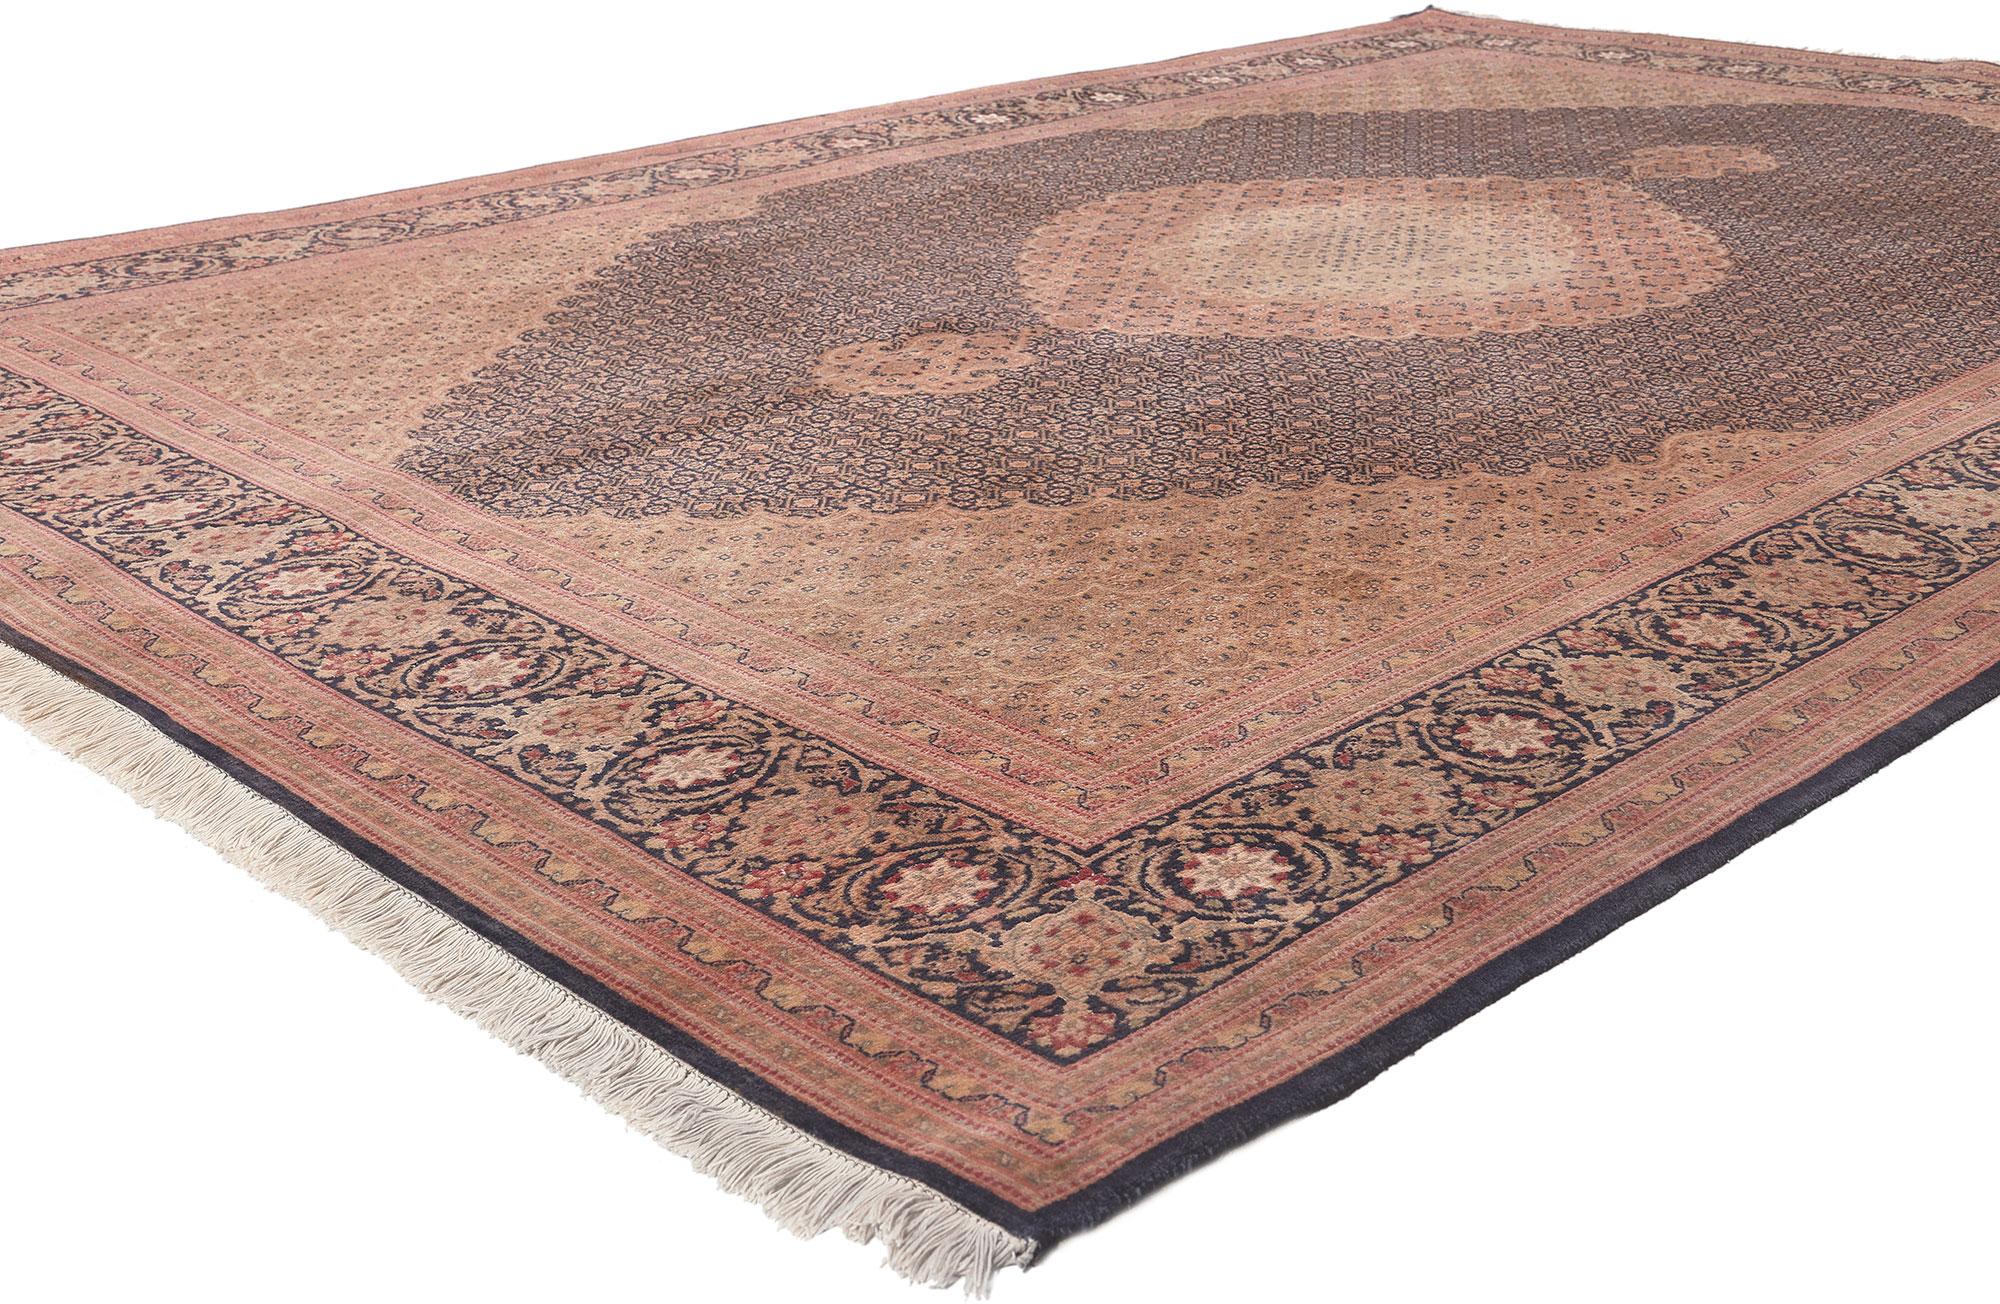 76981 Vintage Persian Tabriz Rug, 06'08 x 10'00.
Timeless elegance meets traditional sensibility in this hand knotted wool and silk vintage Persian Tabriz rug. The meticulously ornate details and regal color palette woven into this piece work